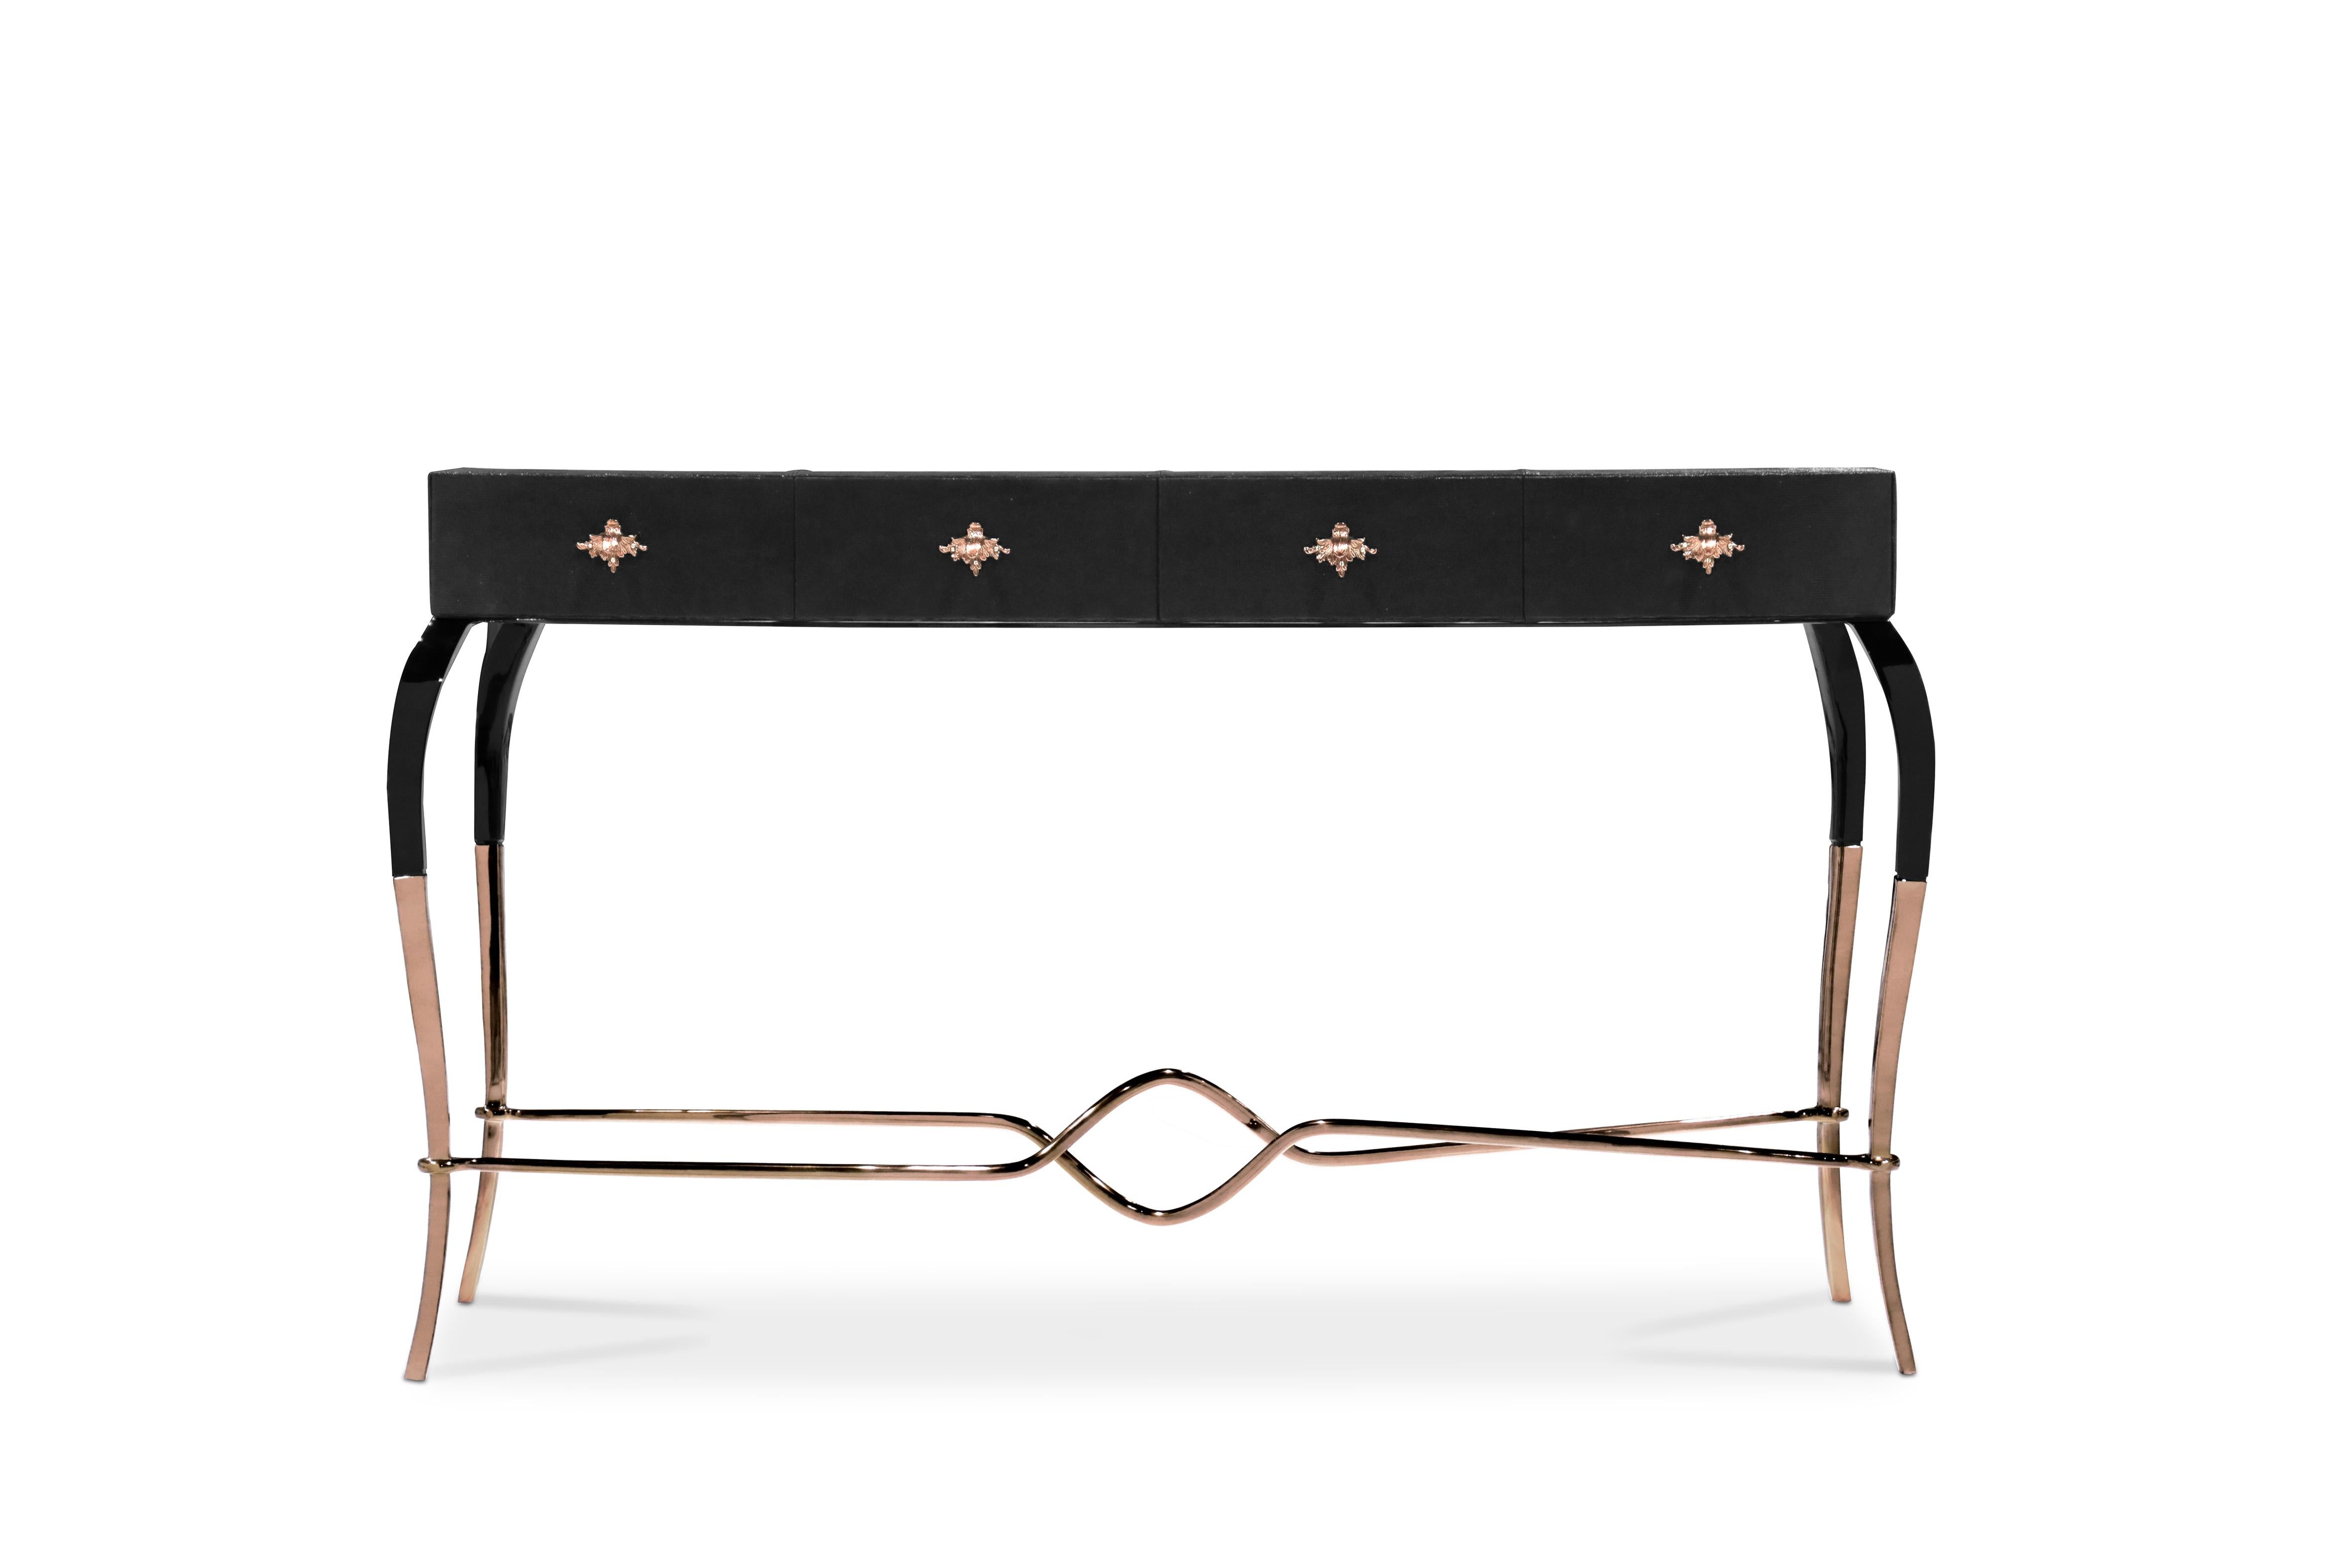 Undergoing a sultry revamp, the Luridae console emerges with a tantalizing yet sophisticated new aura. Shedding the golden dragon flies, her top is adorned in tightly wrapped, shimmering reptile embossed leather with ornate metal pulls on each of